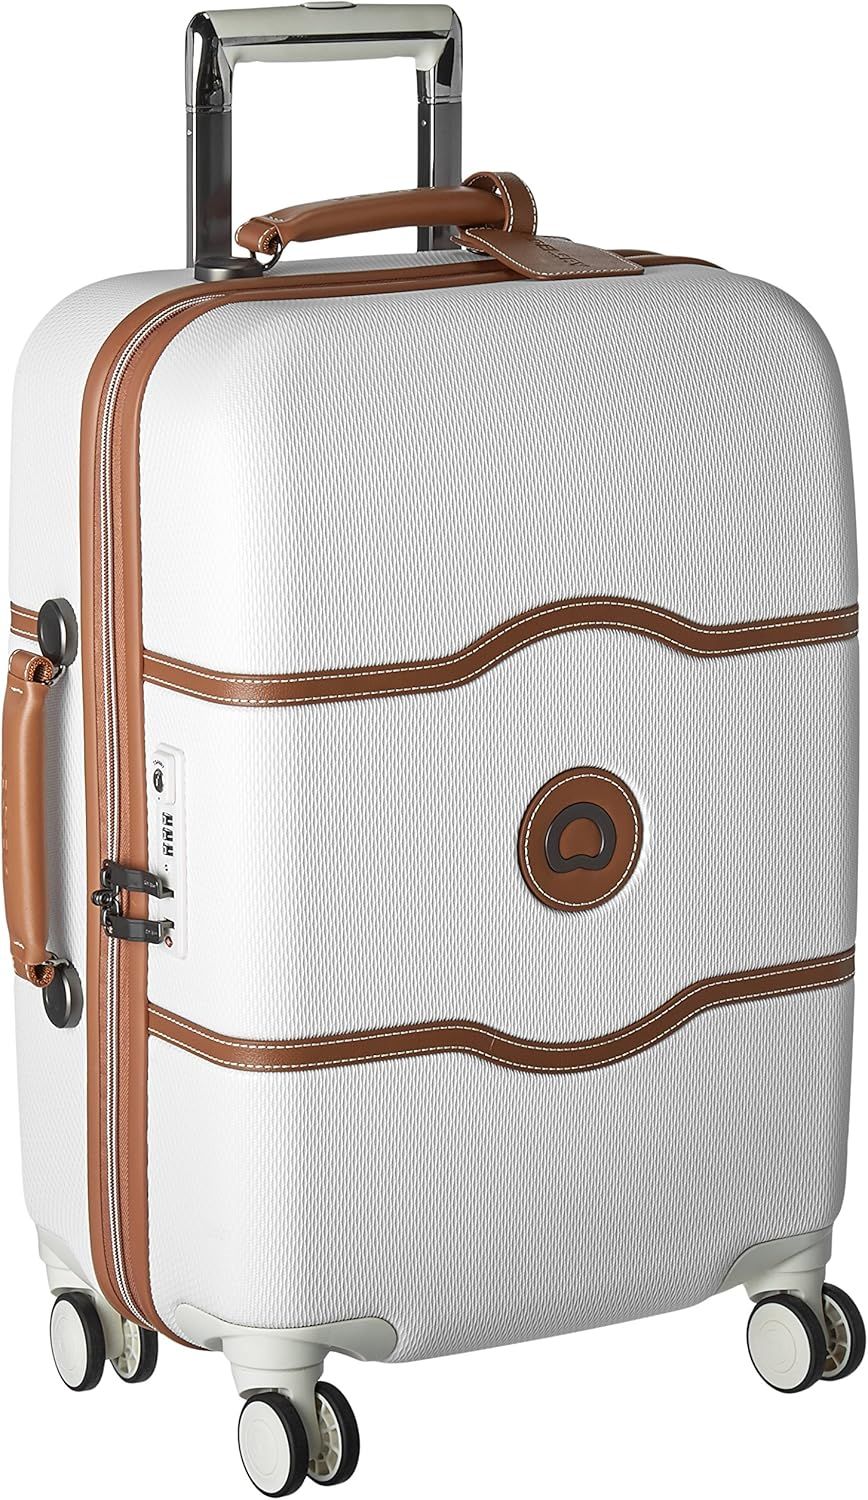 DELSEY Paris Chatelet Hardside Luggage with Spinner Wheels, Champagne White, Carry-on 21 Inch, with  | Amazon (US)